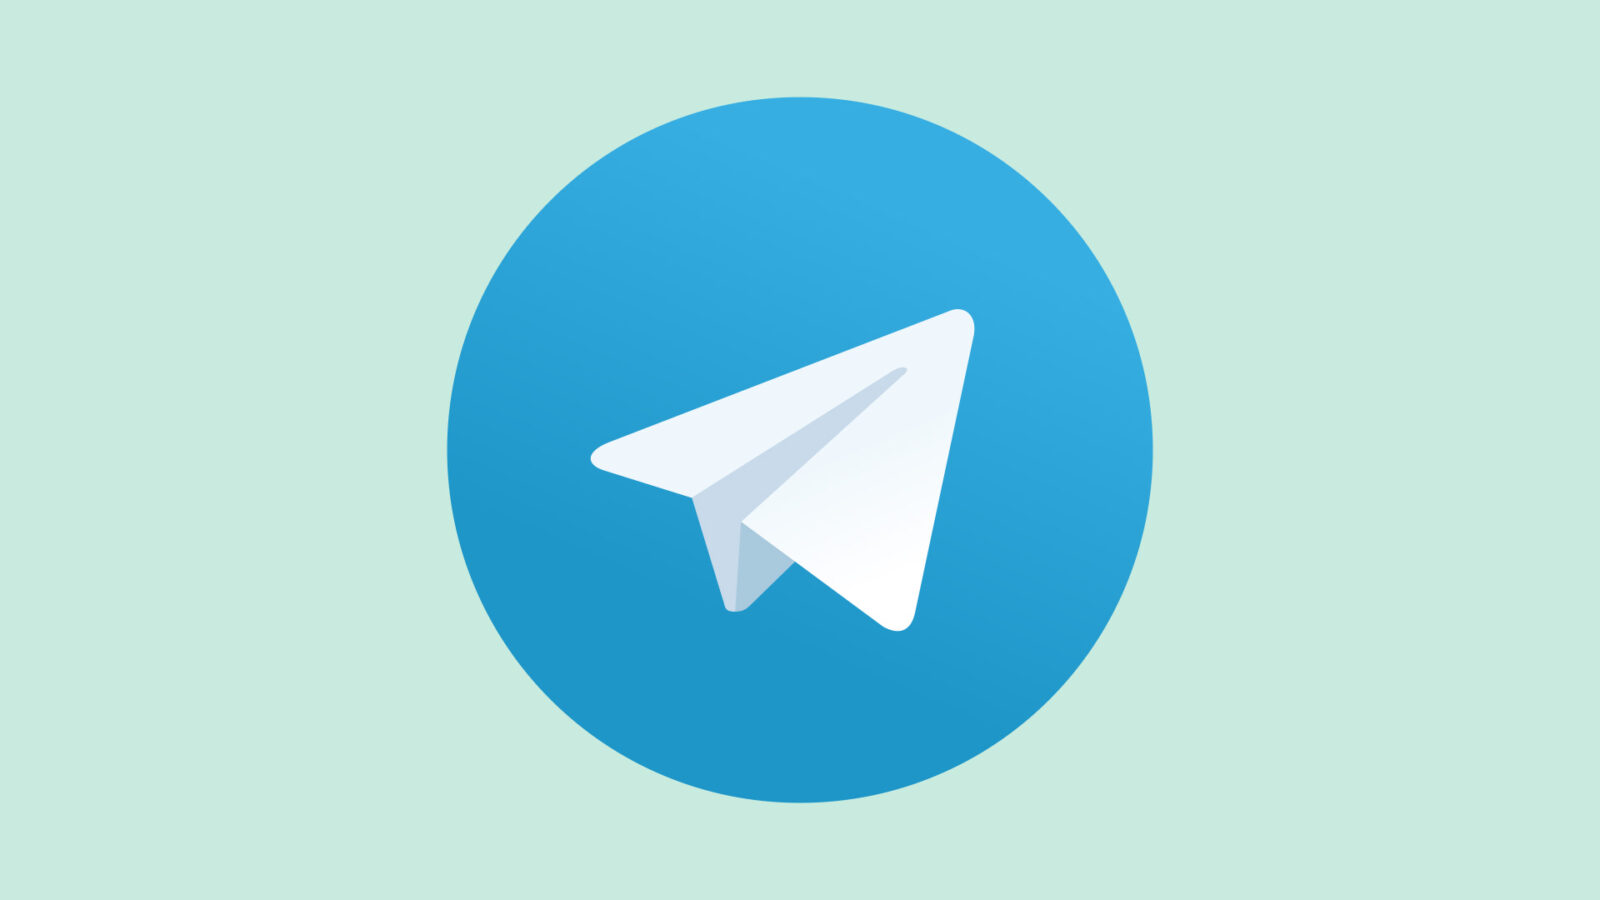 Telegram Adds in-App Video Editor, Two-Step Verification and More